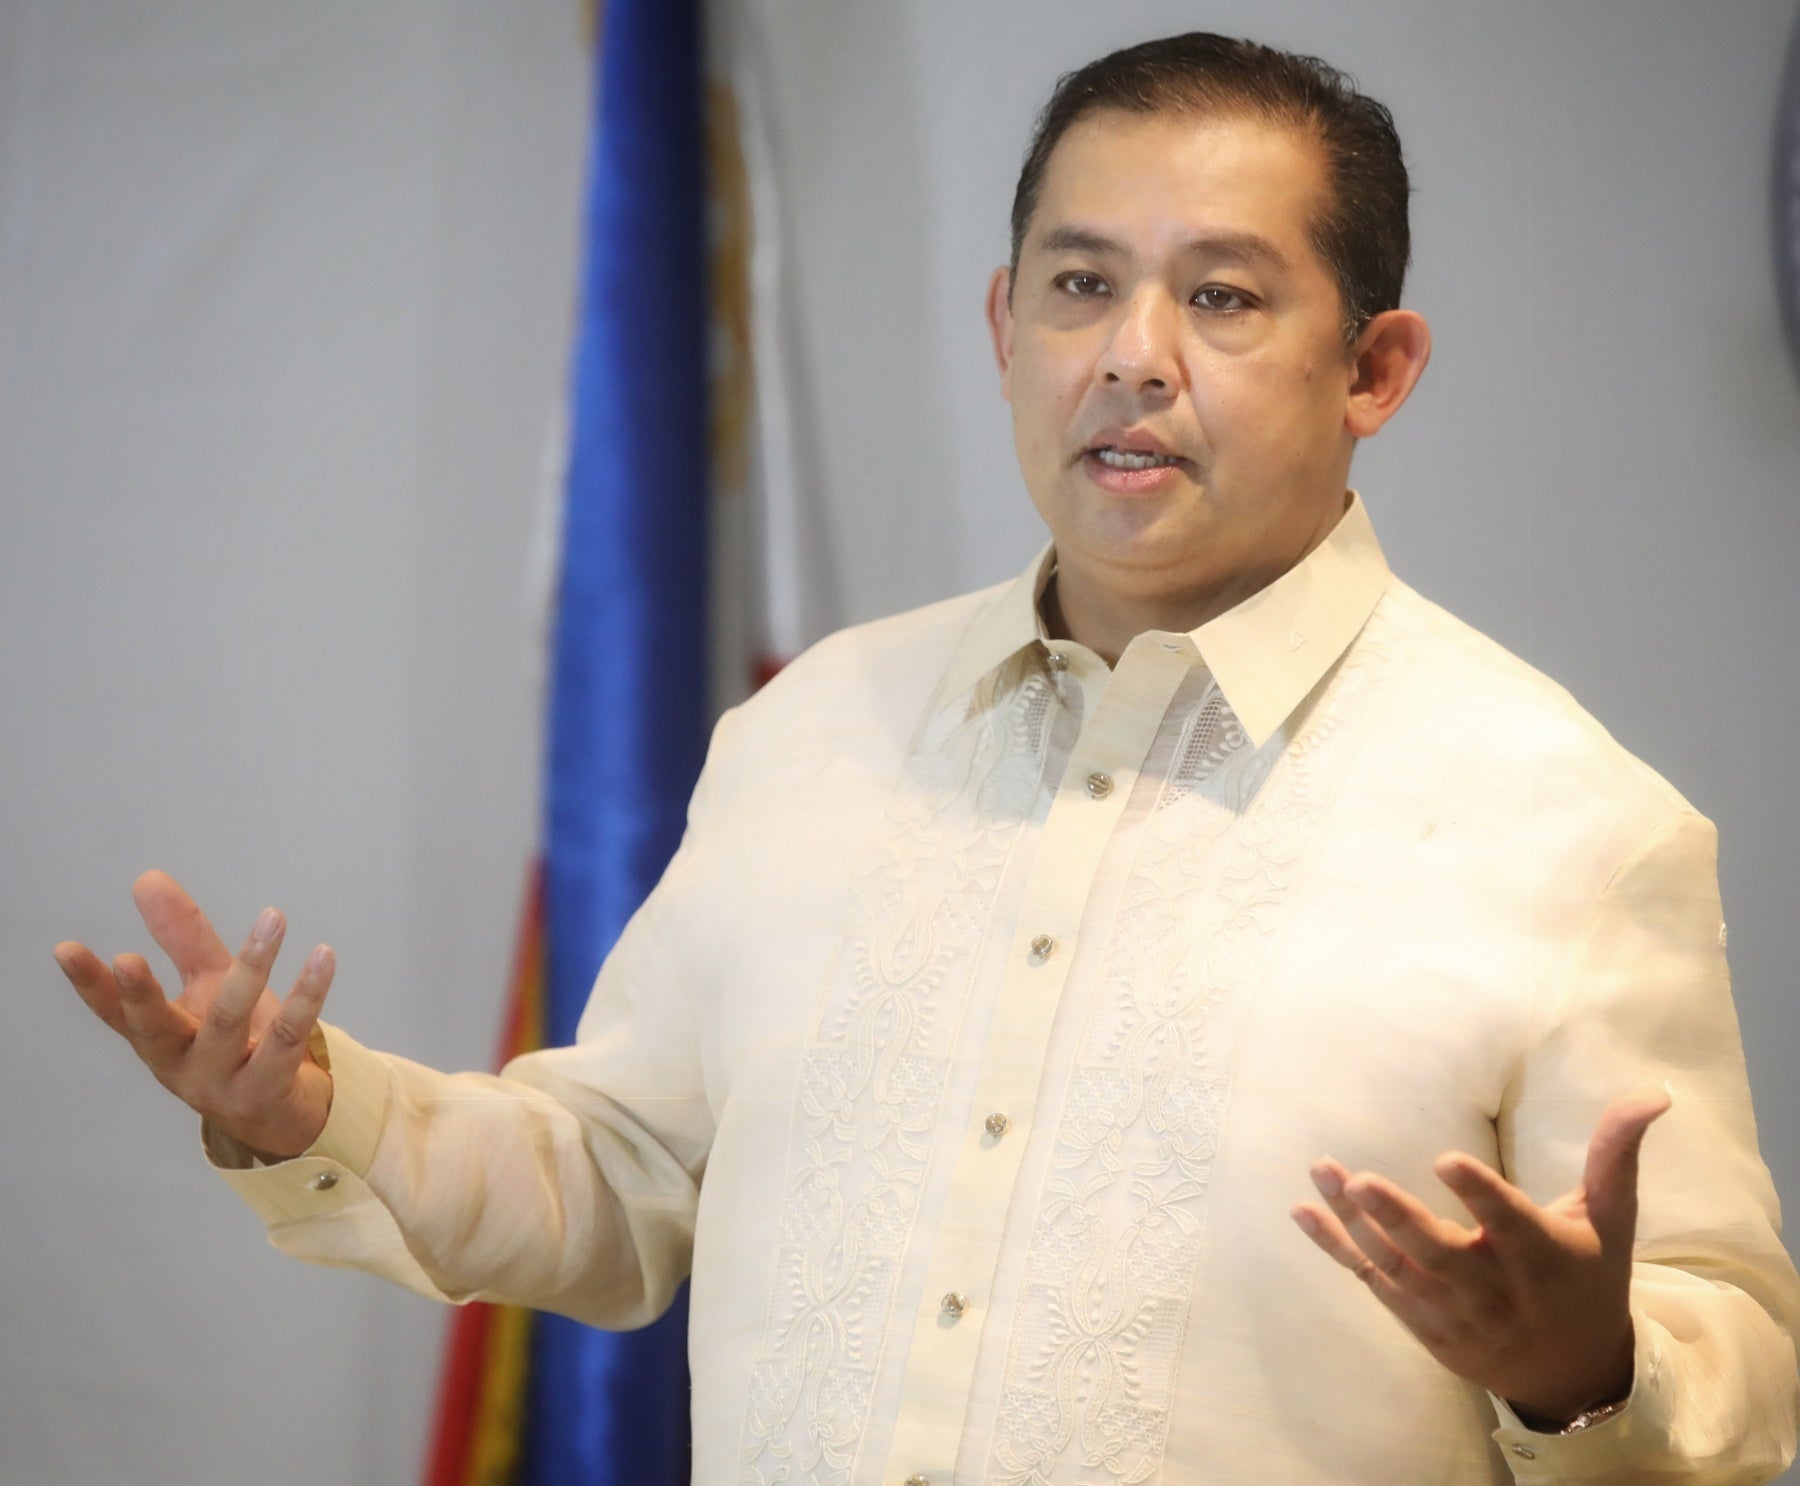 Lower inflation reflects gov’t commitment to address rising prices — Romualdez | Inquirer News